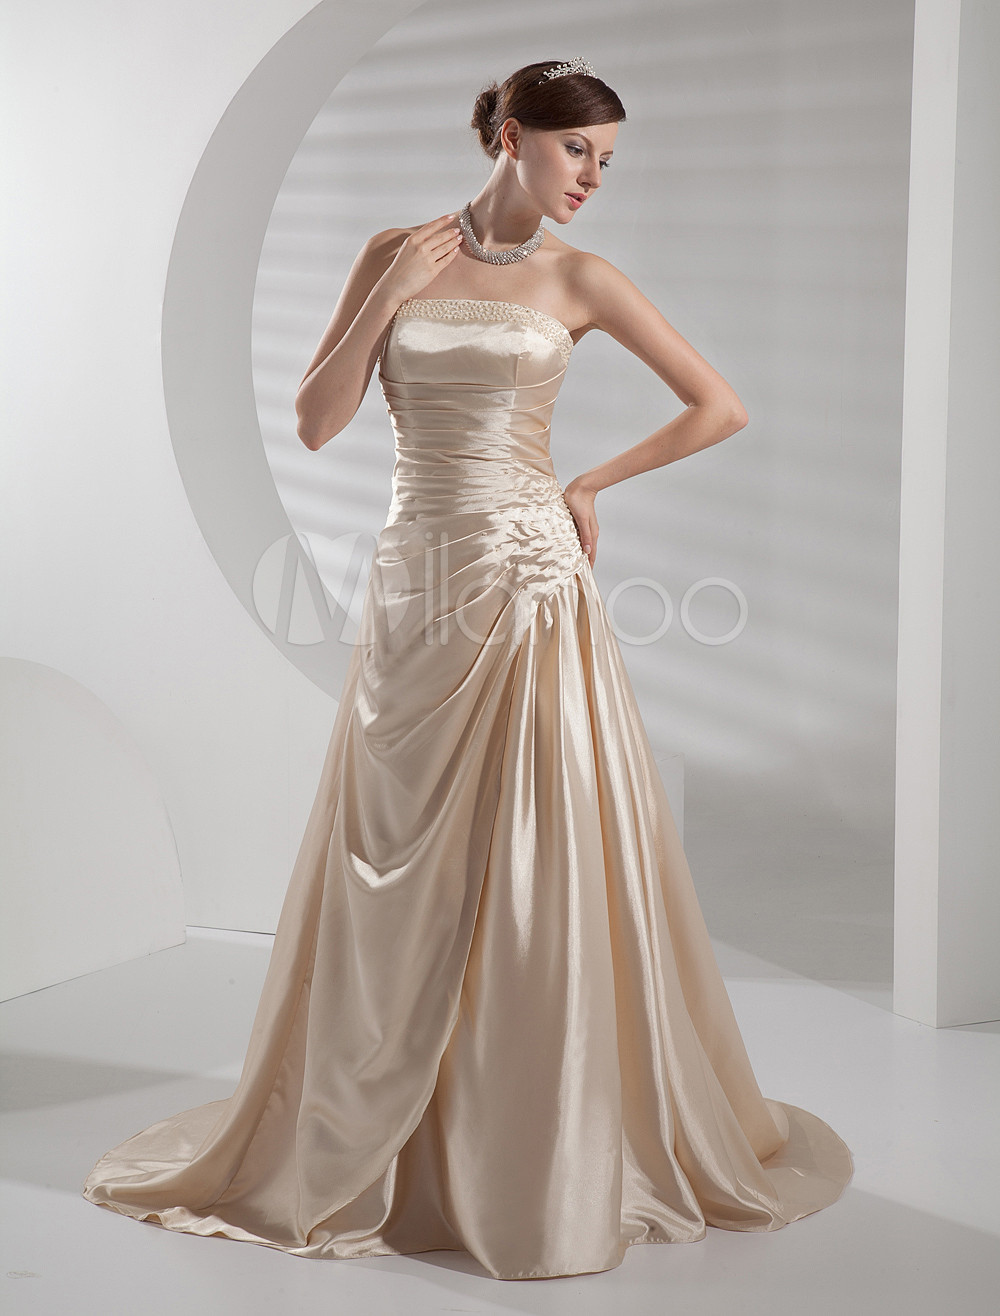 Champagne Wedding Dress
 Champagne Wedding Dress Strapless Backless Ruched Satin